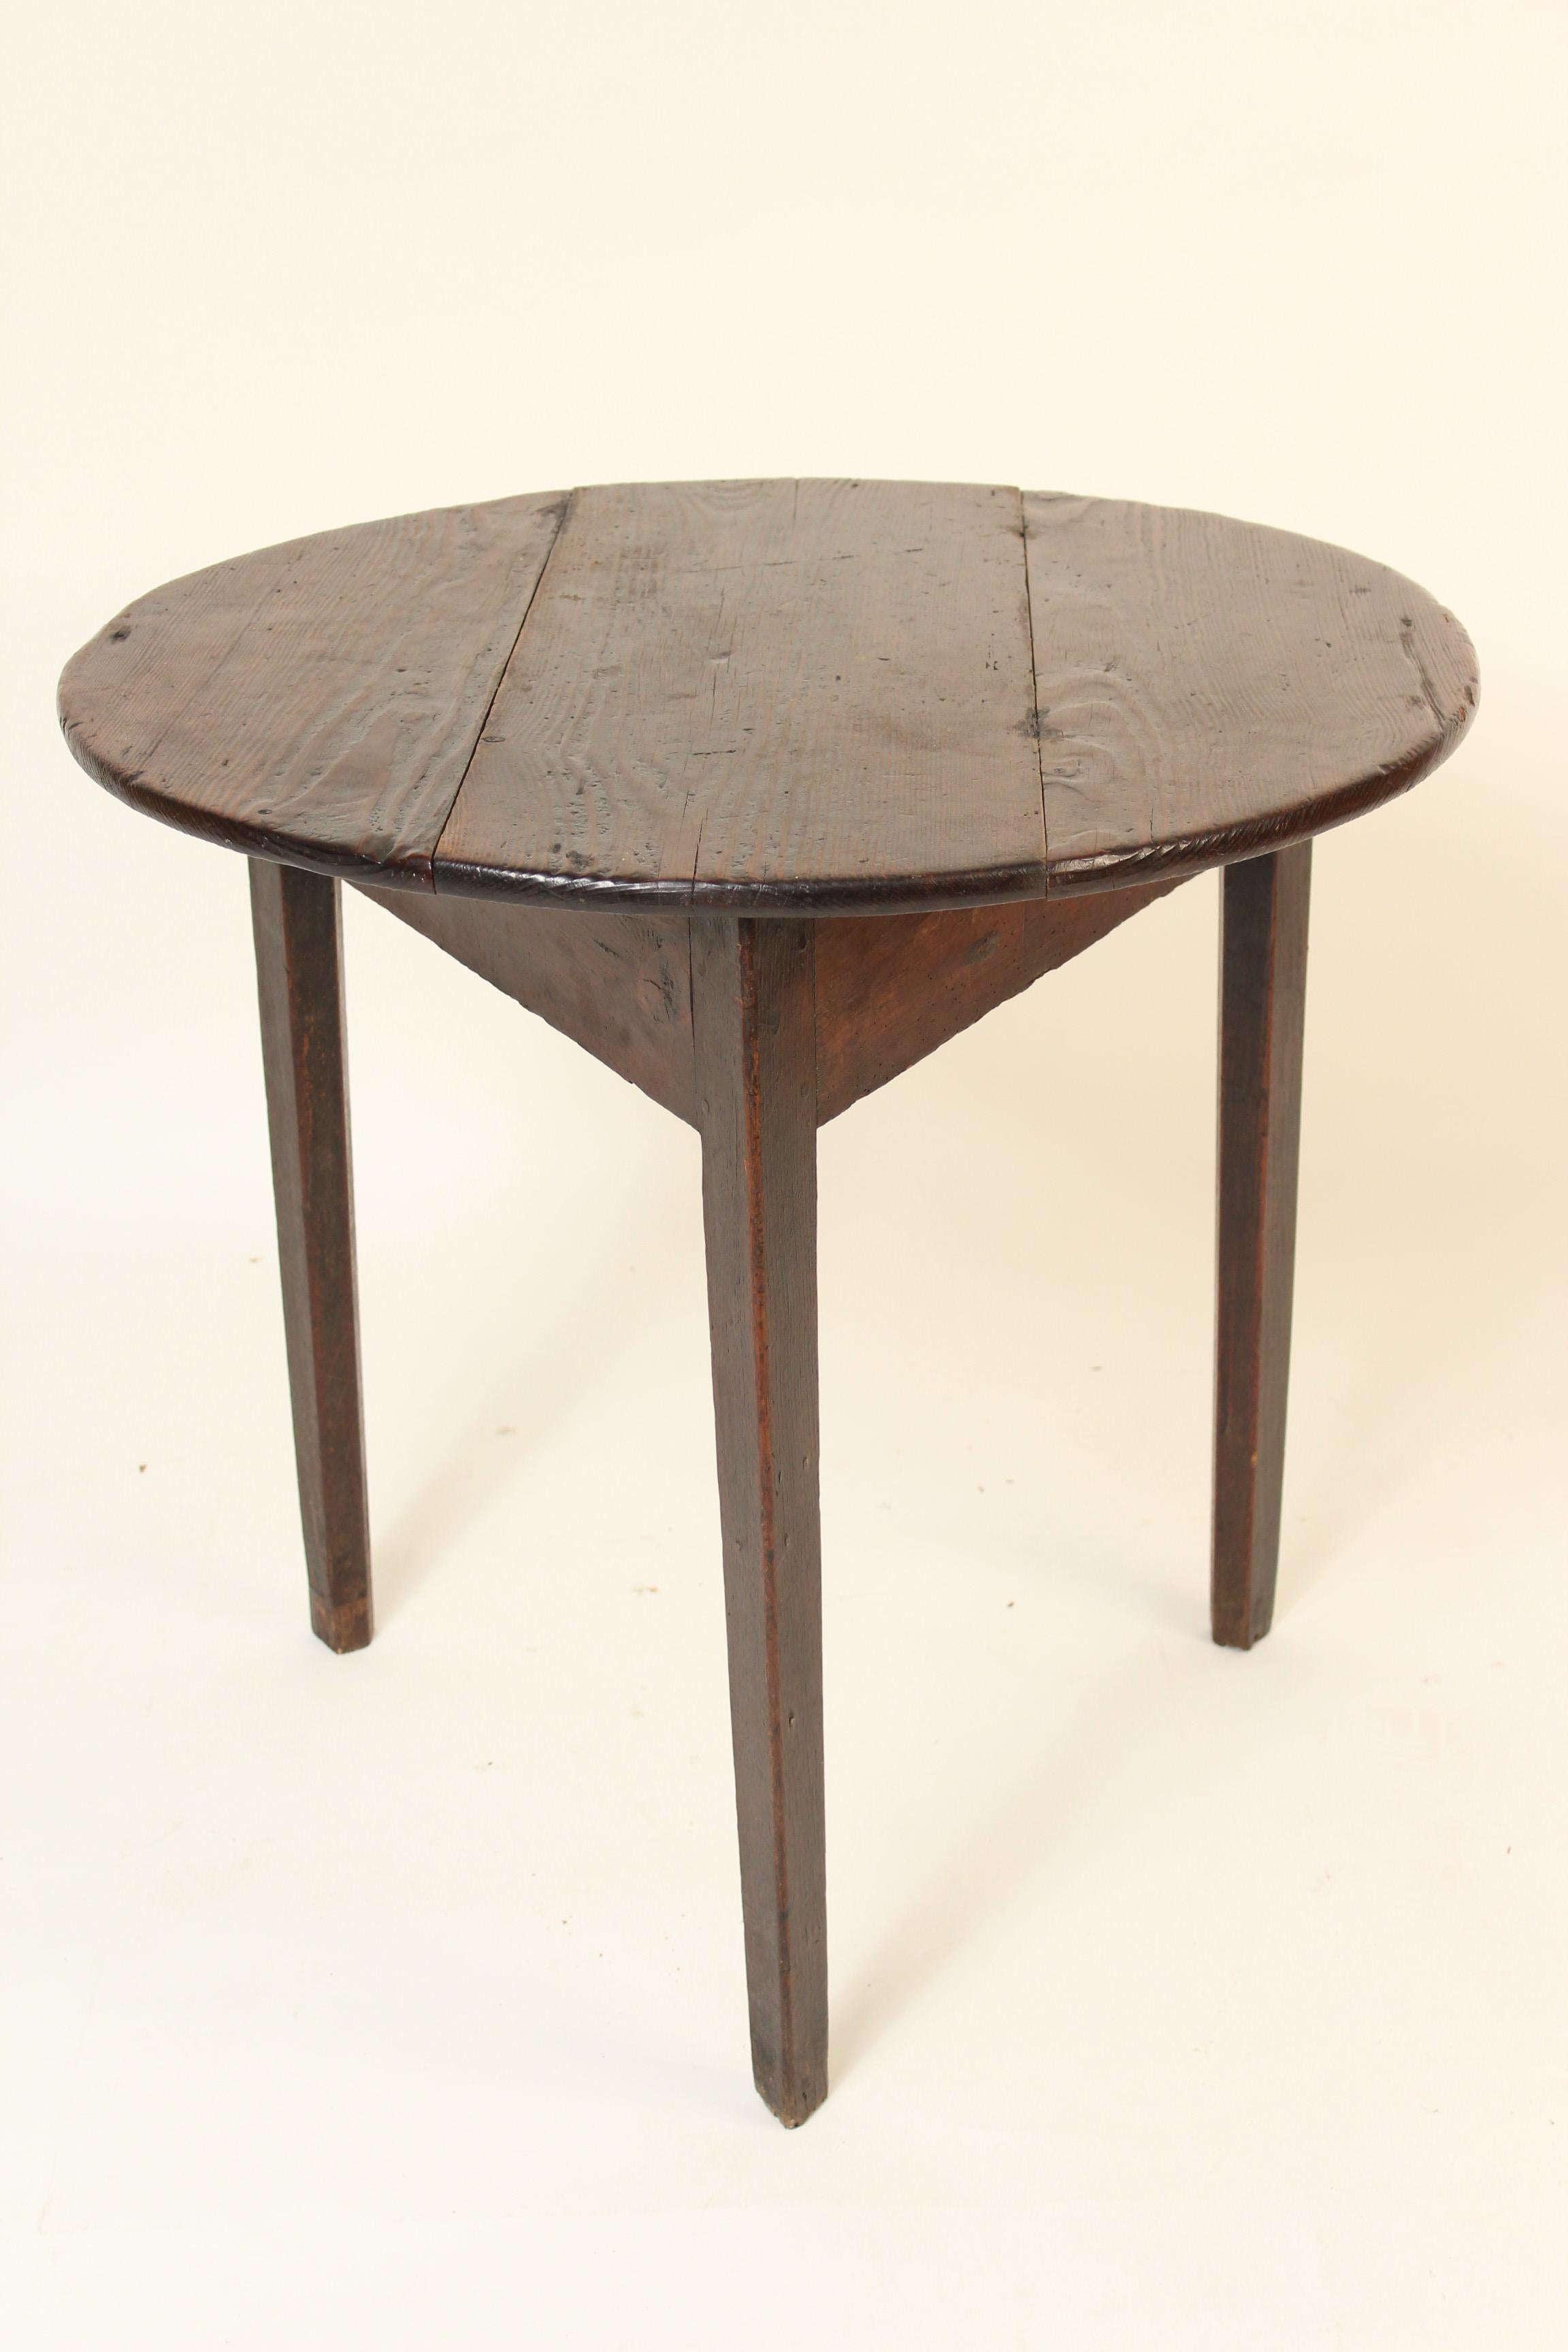 Antique English oak and pine cricket table, 19th century. The top and under bracing / apron are pine. The legs are oak.